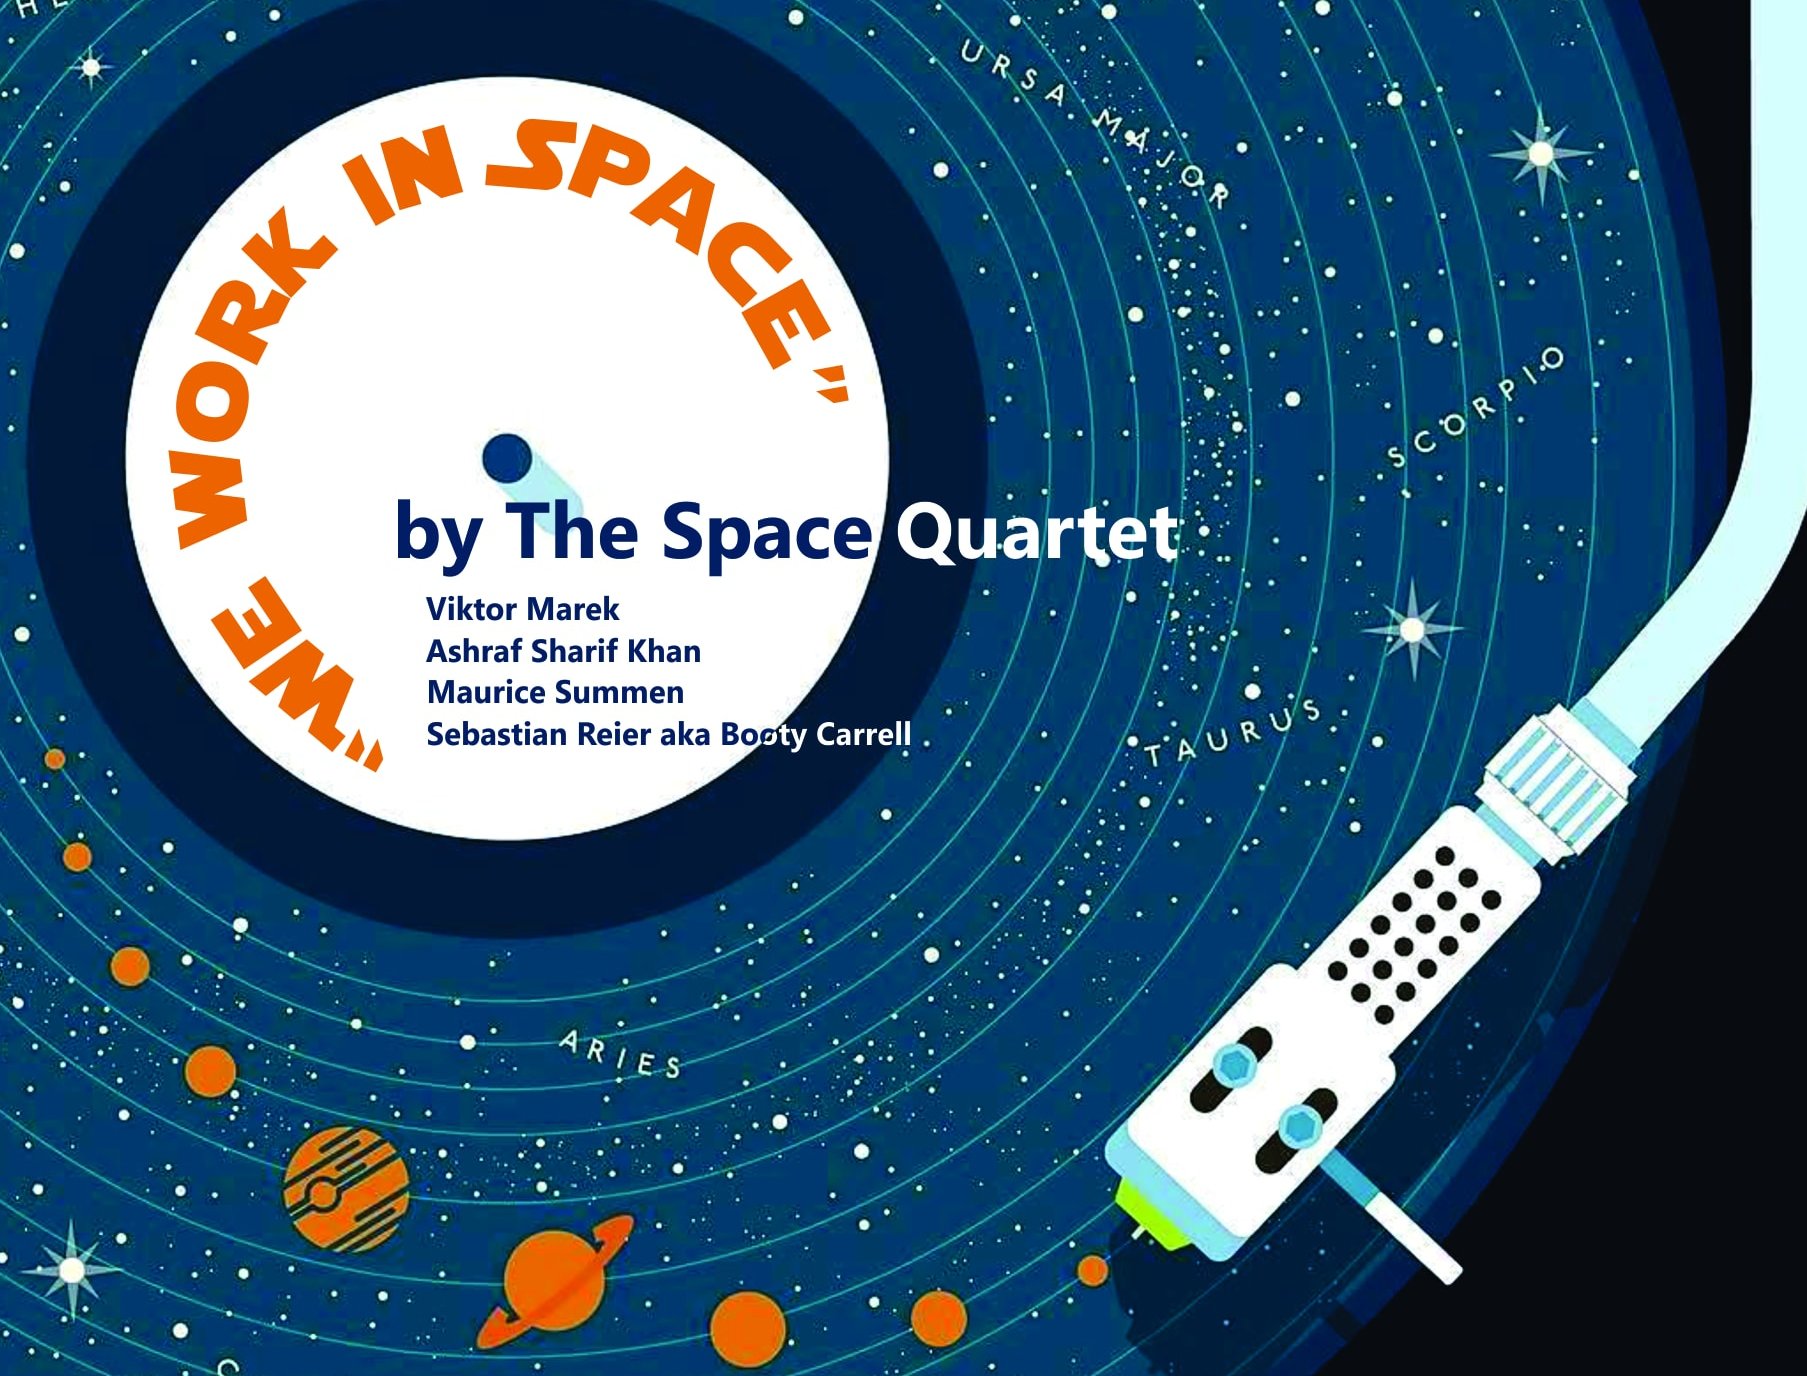 “We work in Space” – by The Space Quartett